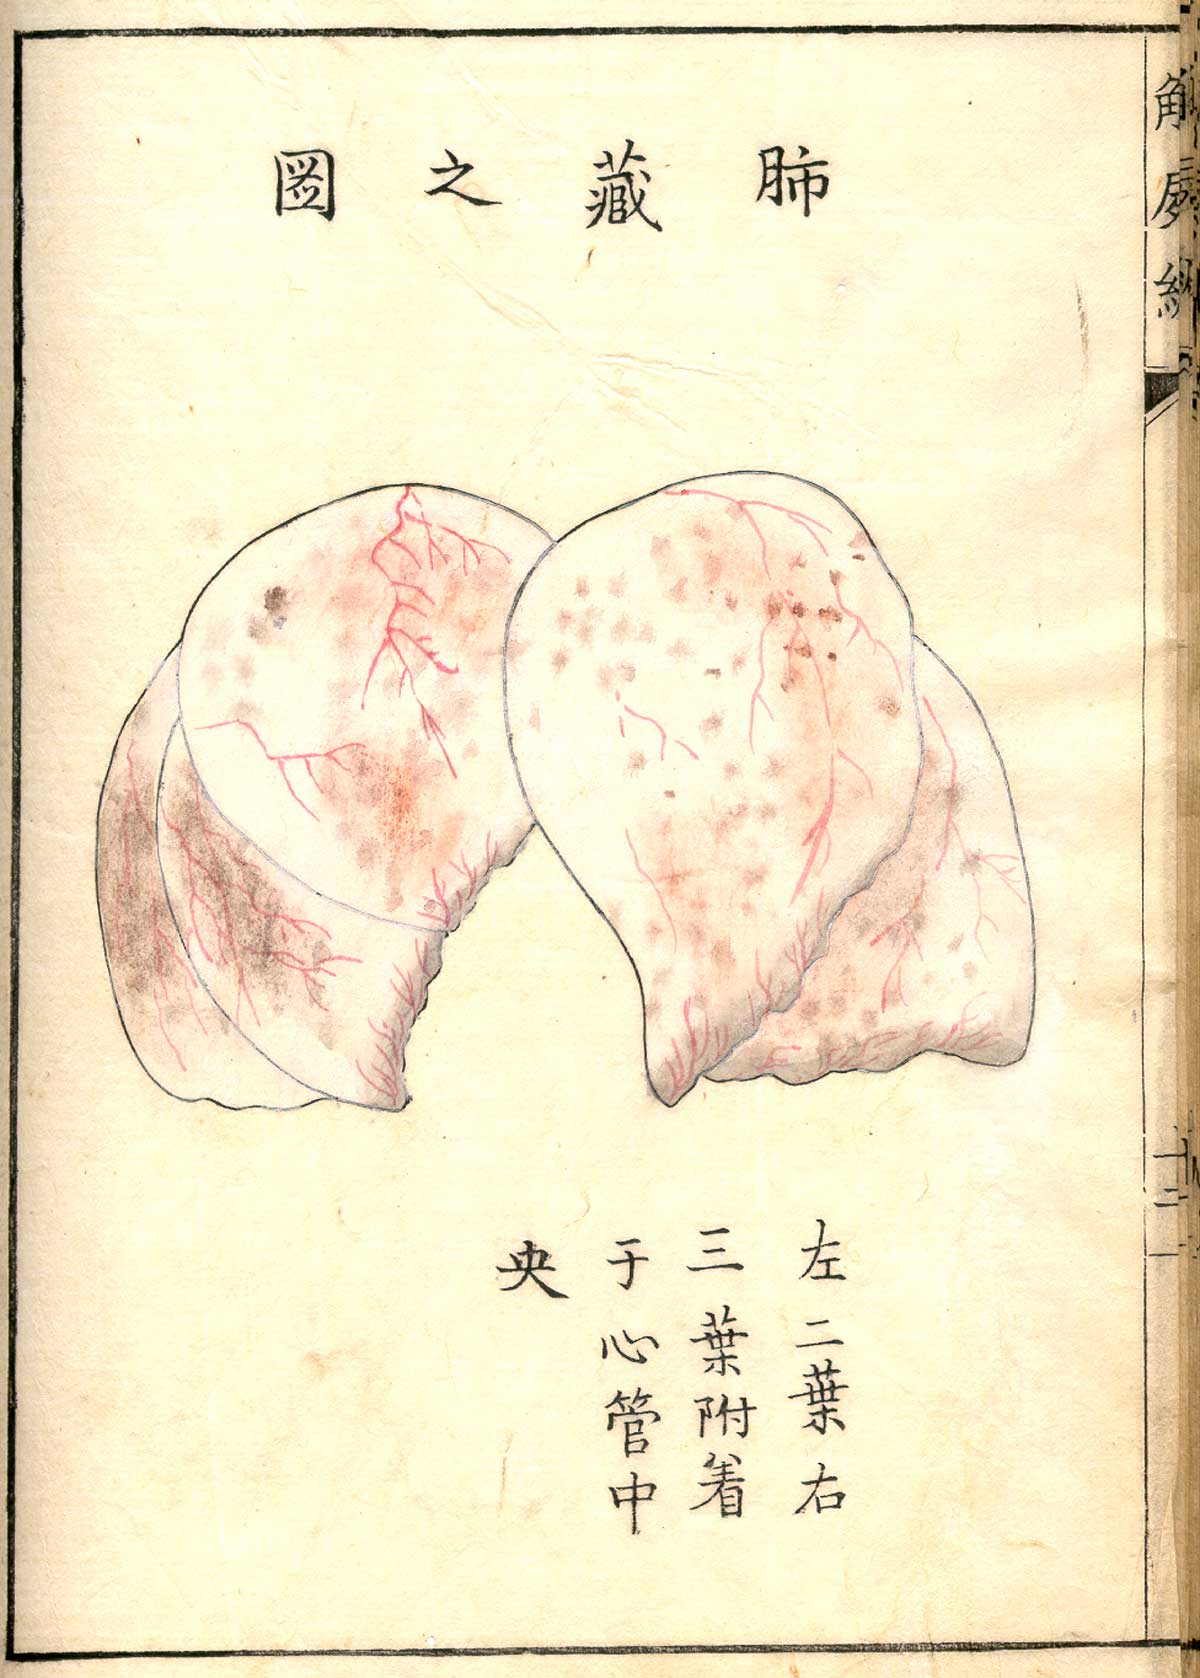 Hand colored woodcut of the lungs, with Japanese text above and below describing some of the structures, from Shinnin Kawaguchi's Kaishi hen, NLM Call no.: WZ 260 K21k 1772.